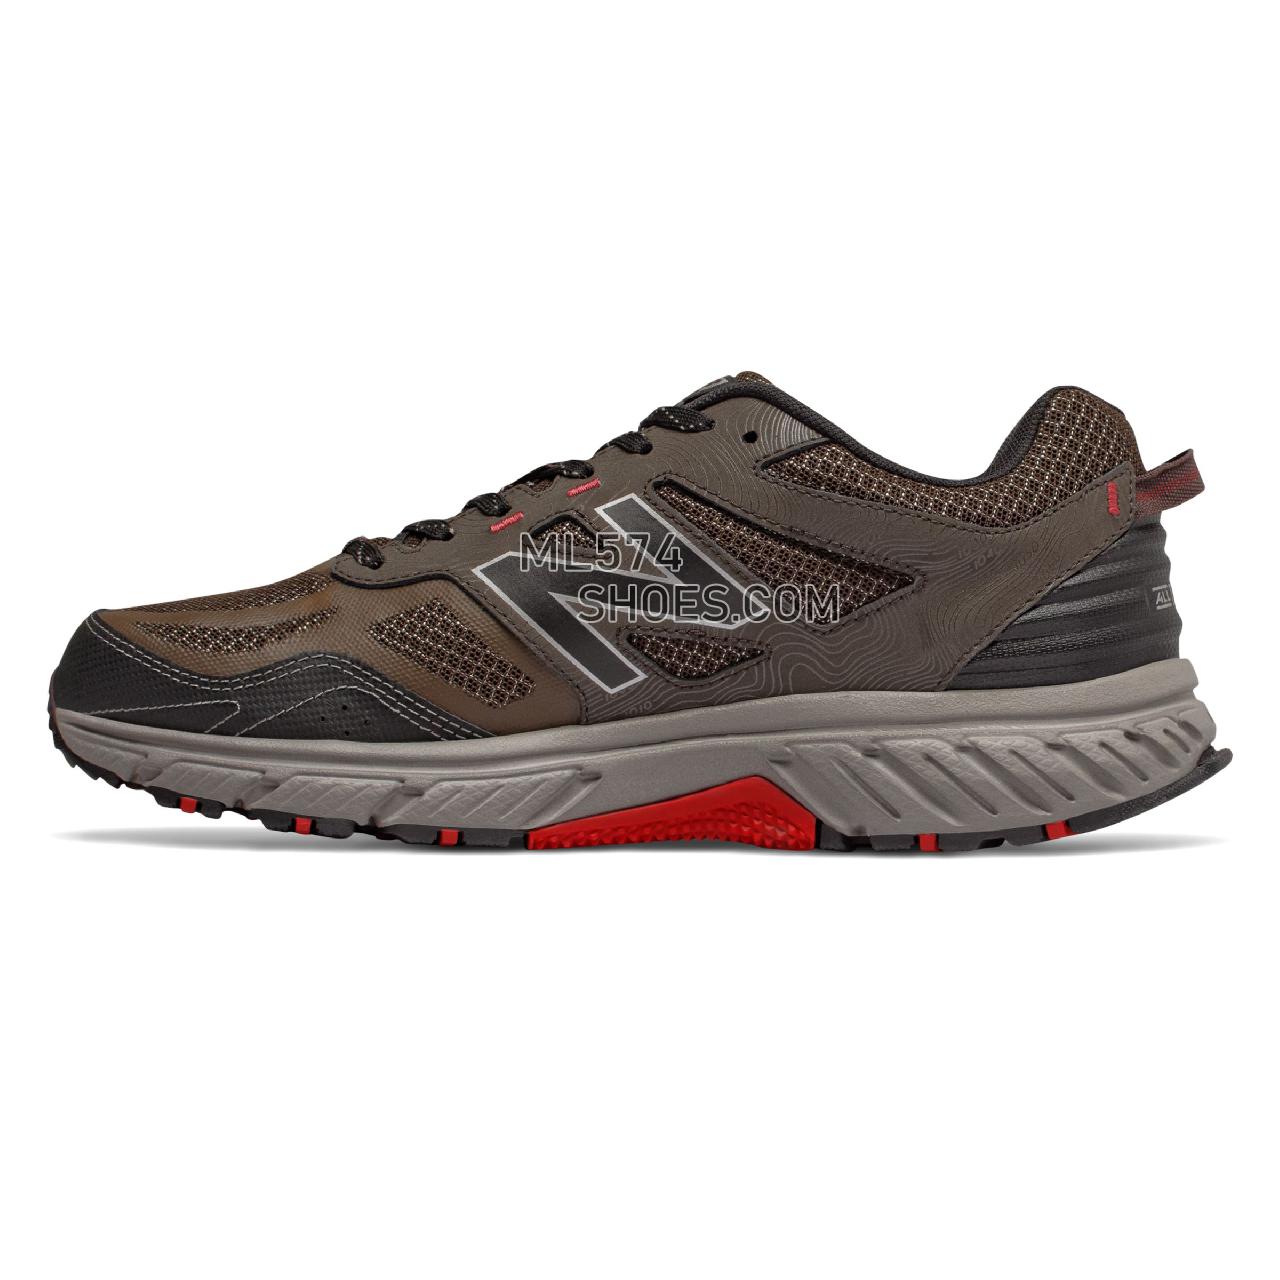 New Balance 510v4 Trail - Men's 510 - Running Chocolate with Black and Team Red - MT510CC4